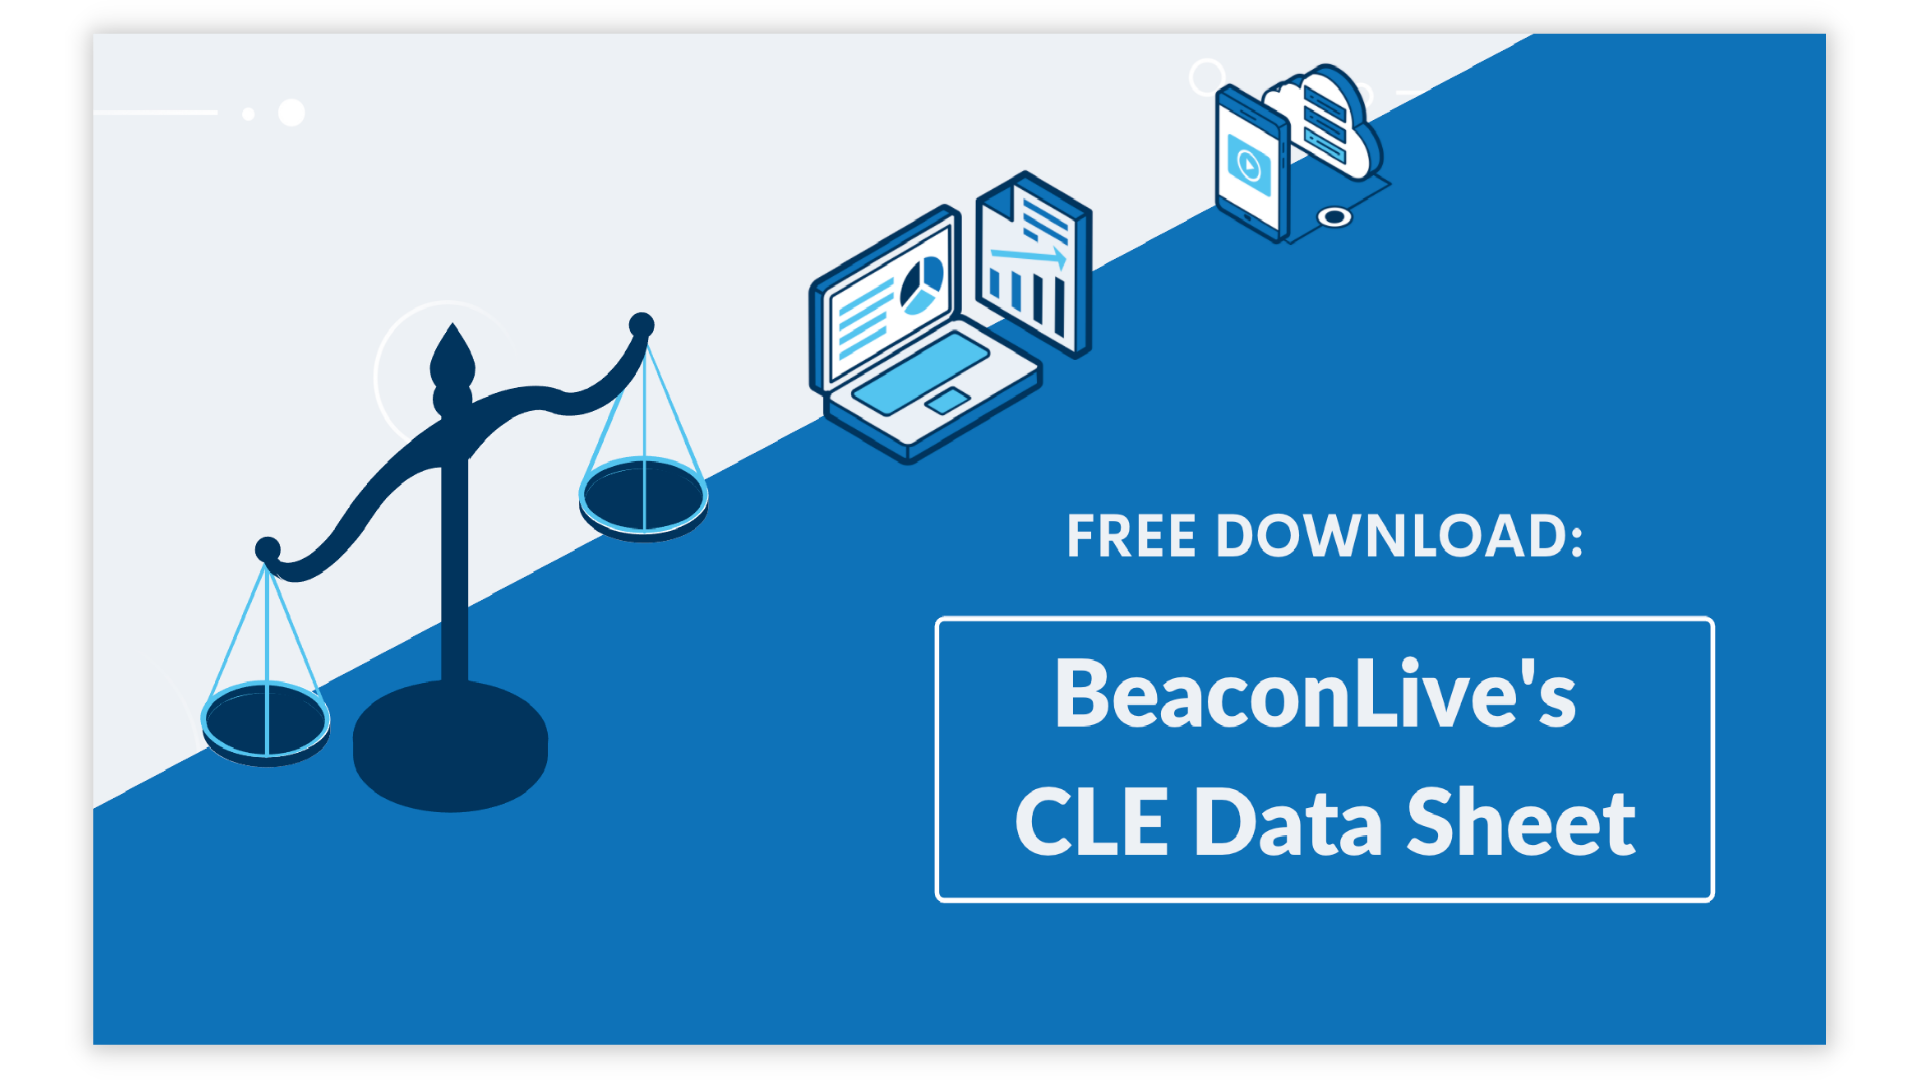 BeaconLive's CLE Data Sheet